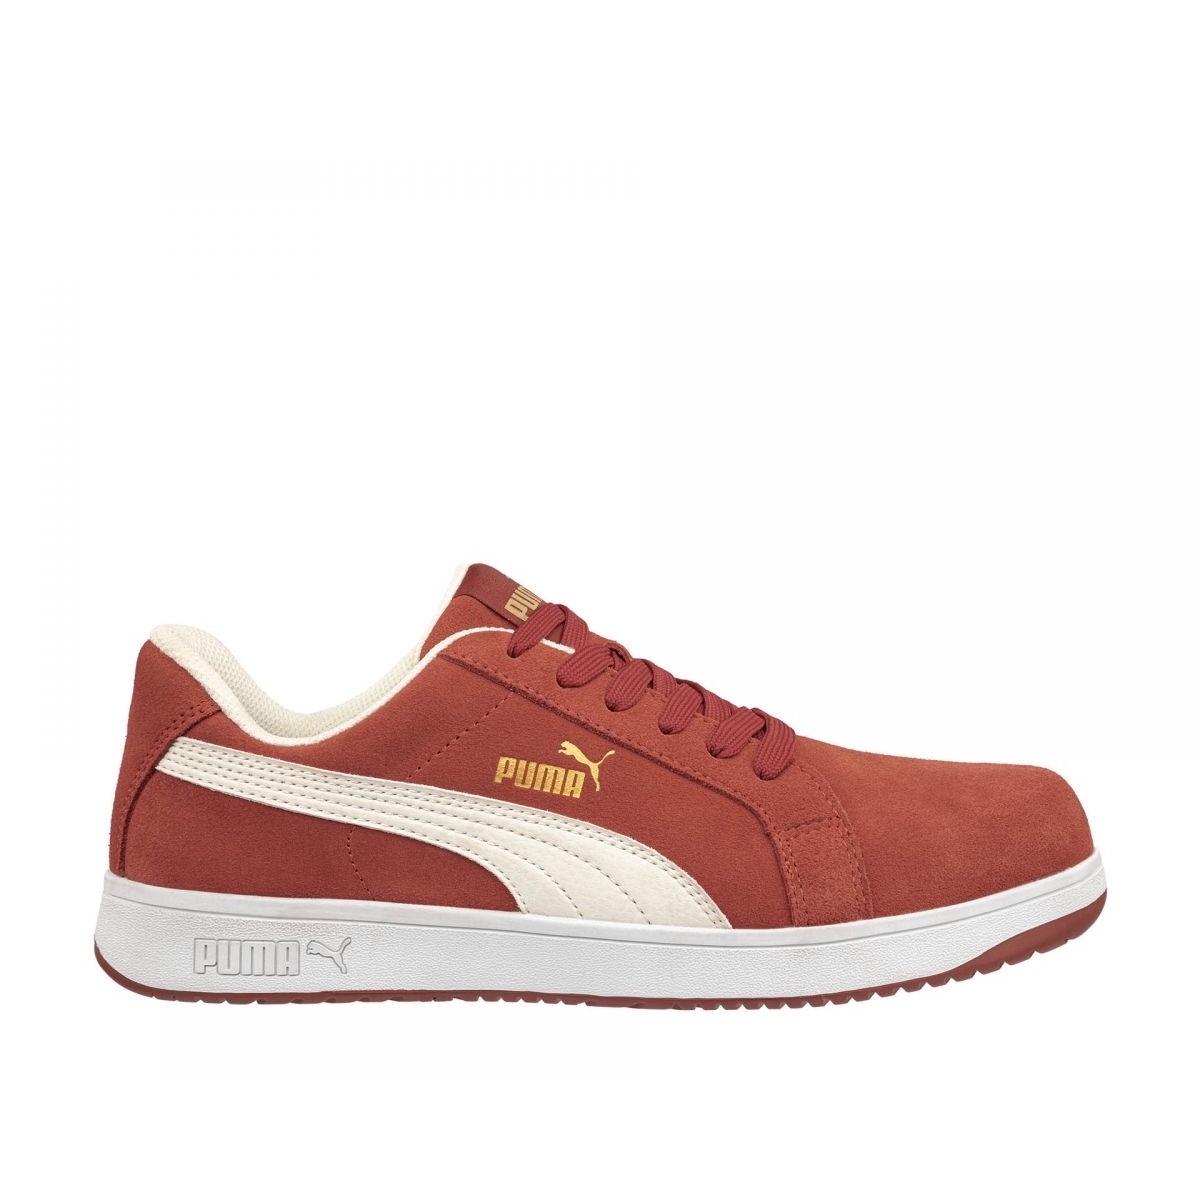 PUMA Safety Men's Iconic Low Composite Toe EH Work Shoes Red Suede - 640045 ONE SIZE RED - RED, 12